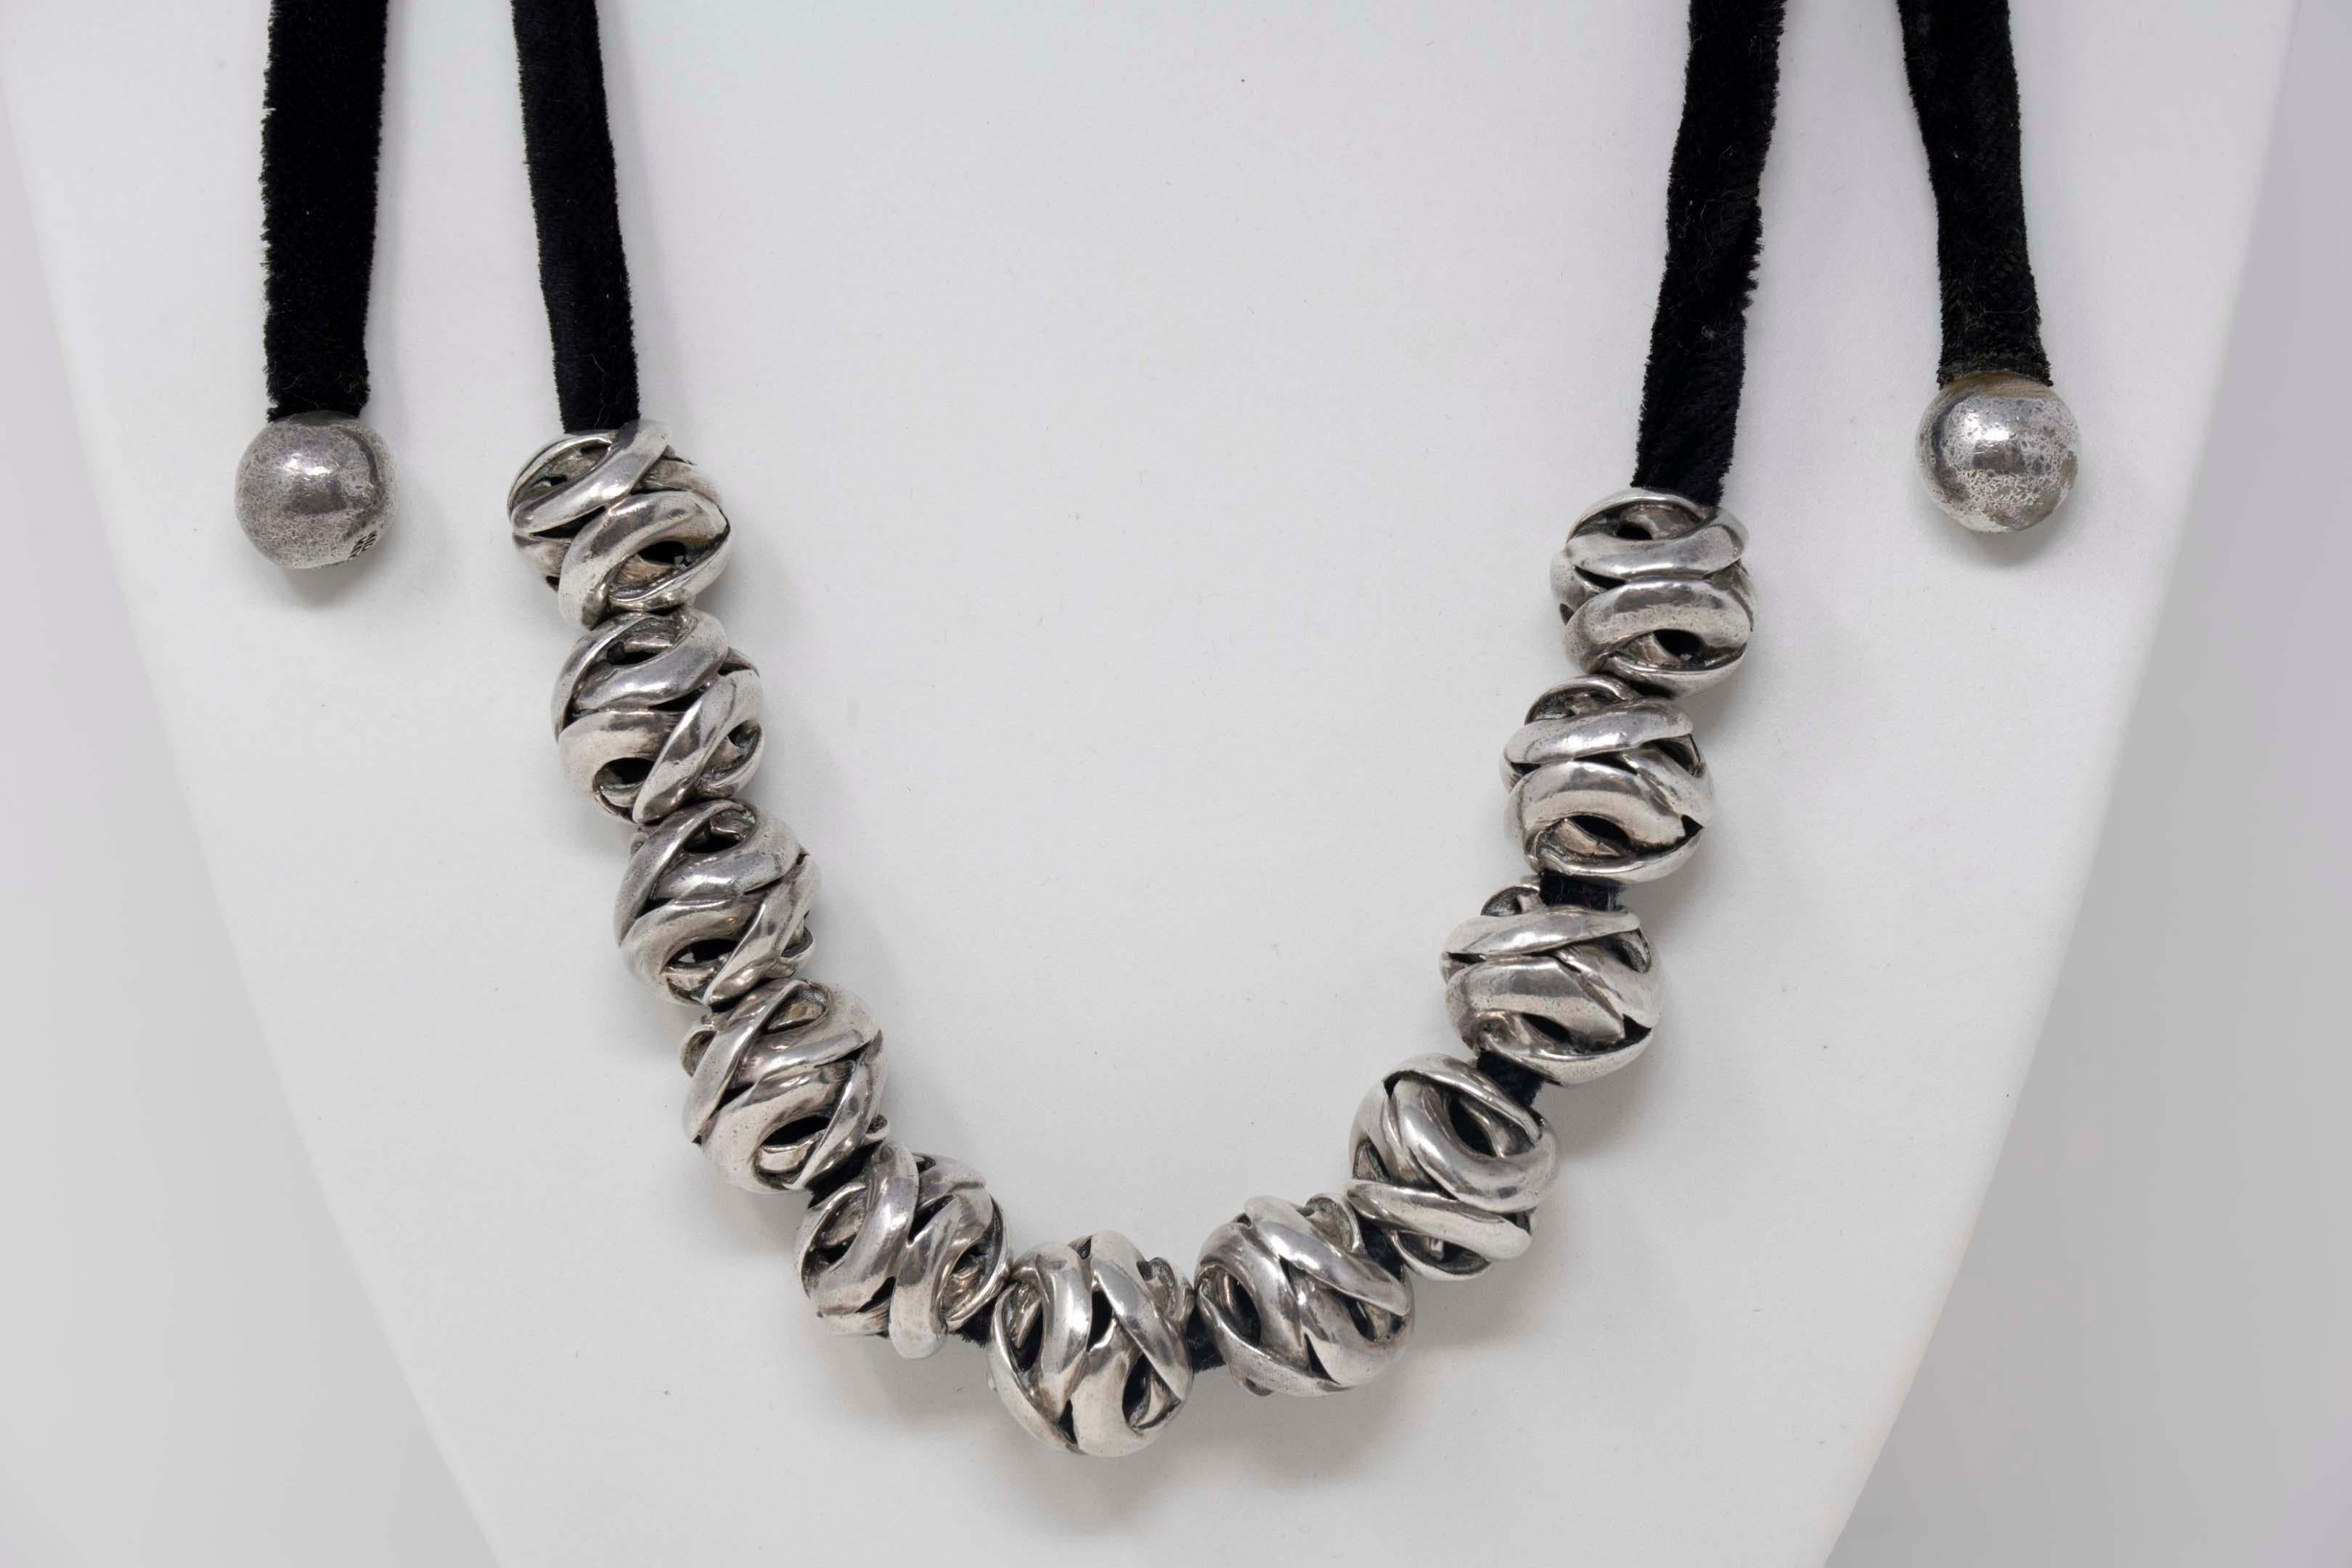 Modernist Mexican Antonio Pineda necklace stamped 970 silver mark with a velvet cord and 11 spheres. Pineda crown mark late 1950. The necklace measures 31 inches long, including the two smaller balls at the end. Weighs 110 grams. In good condition,